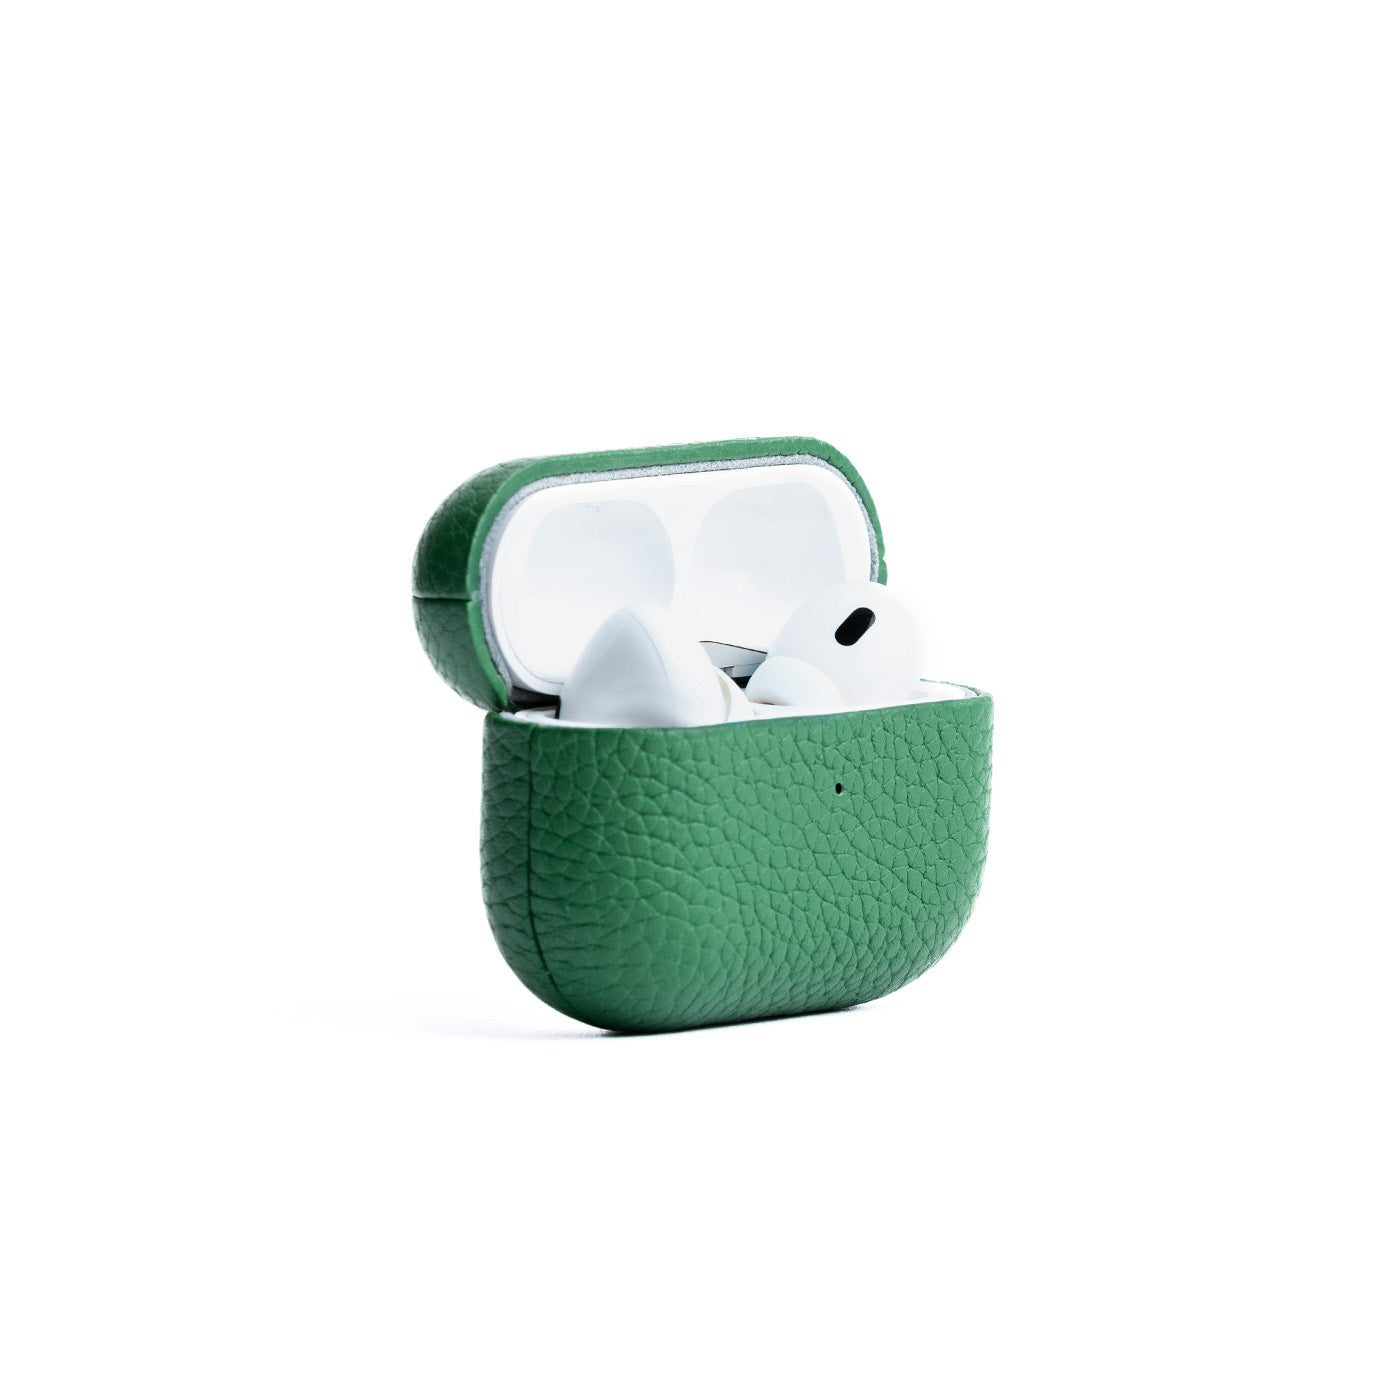 Rainforest | Leather cover for airpod case open